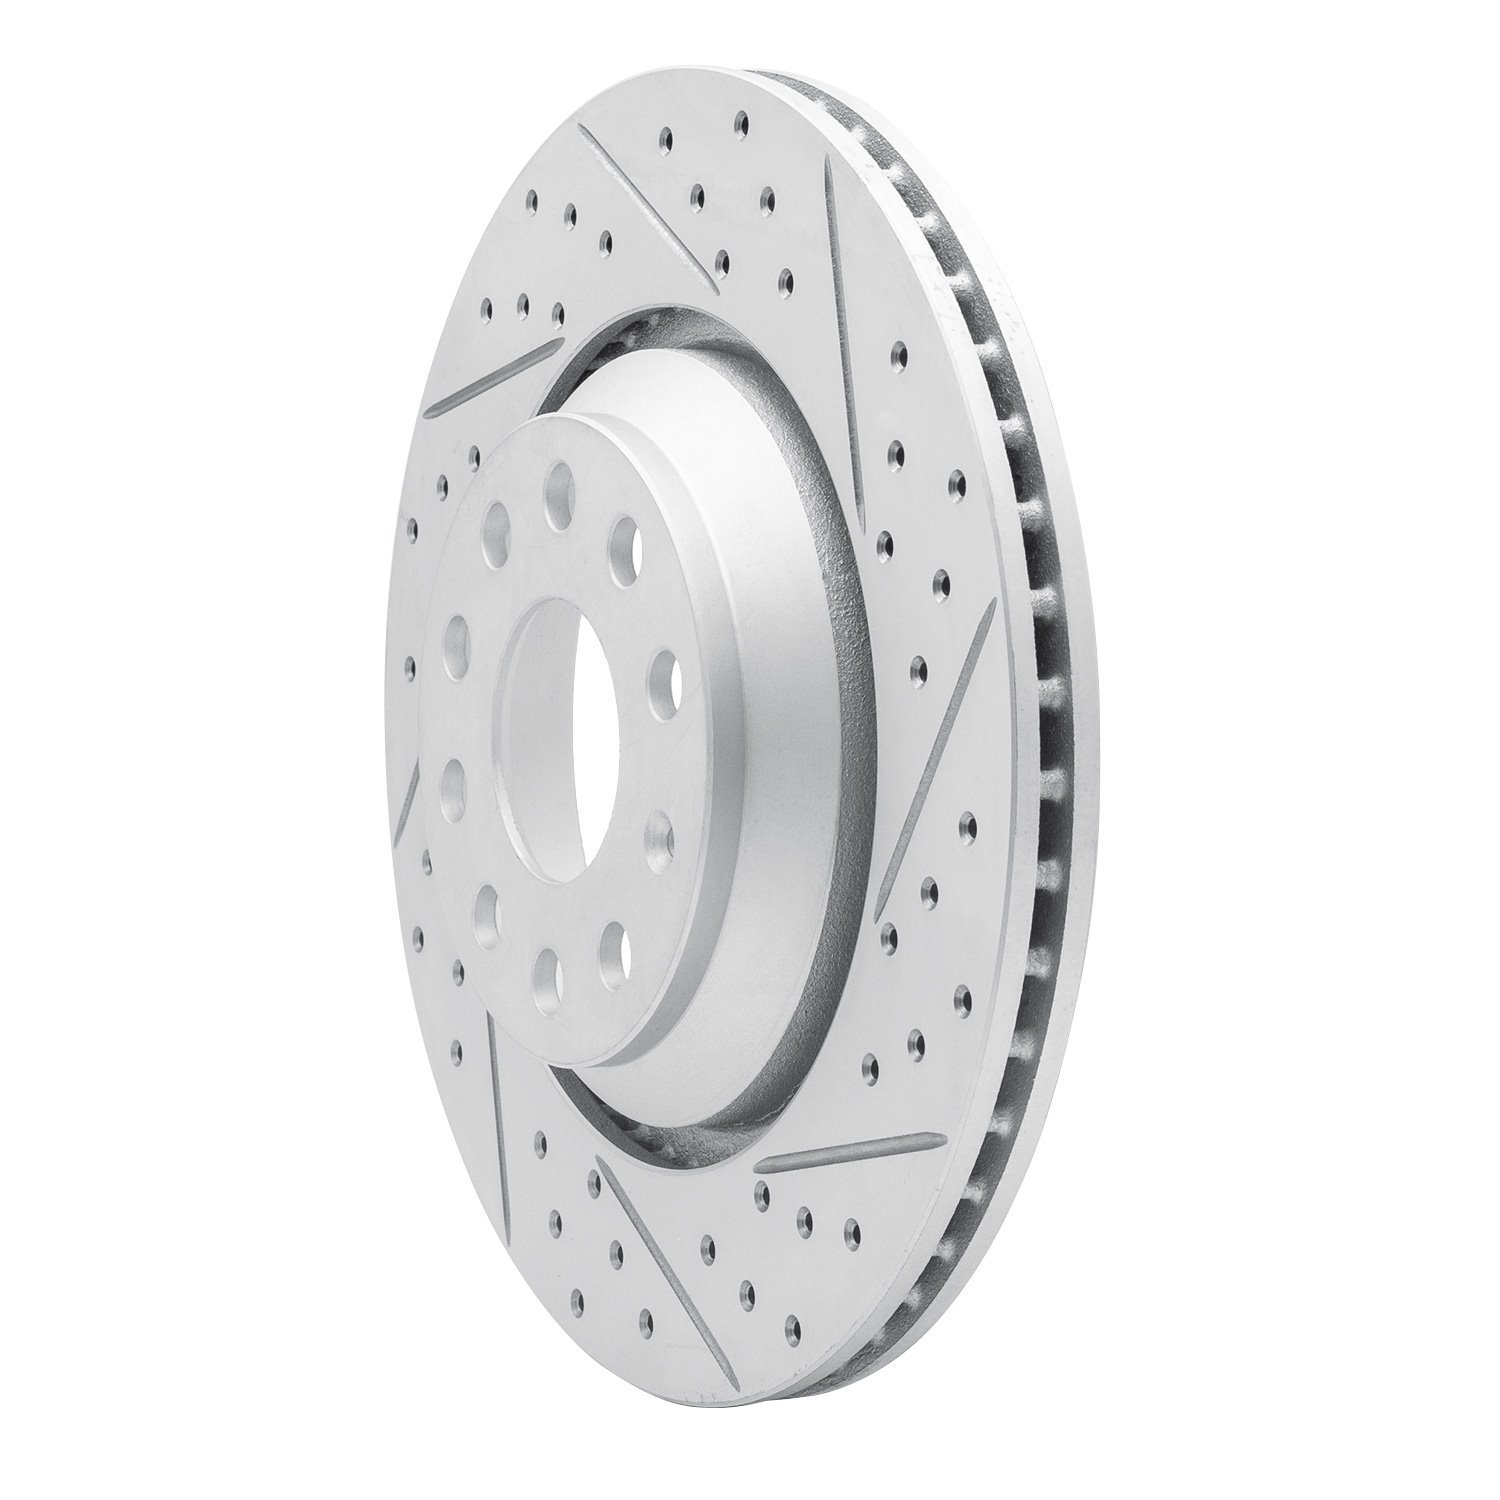 830-74030R Geoperformance Drilled/Slotted Brake Rotor, Fits Select Audi/Volkswagen, Position: Rear Right